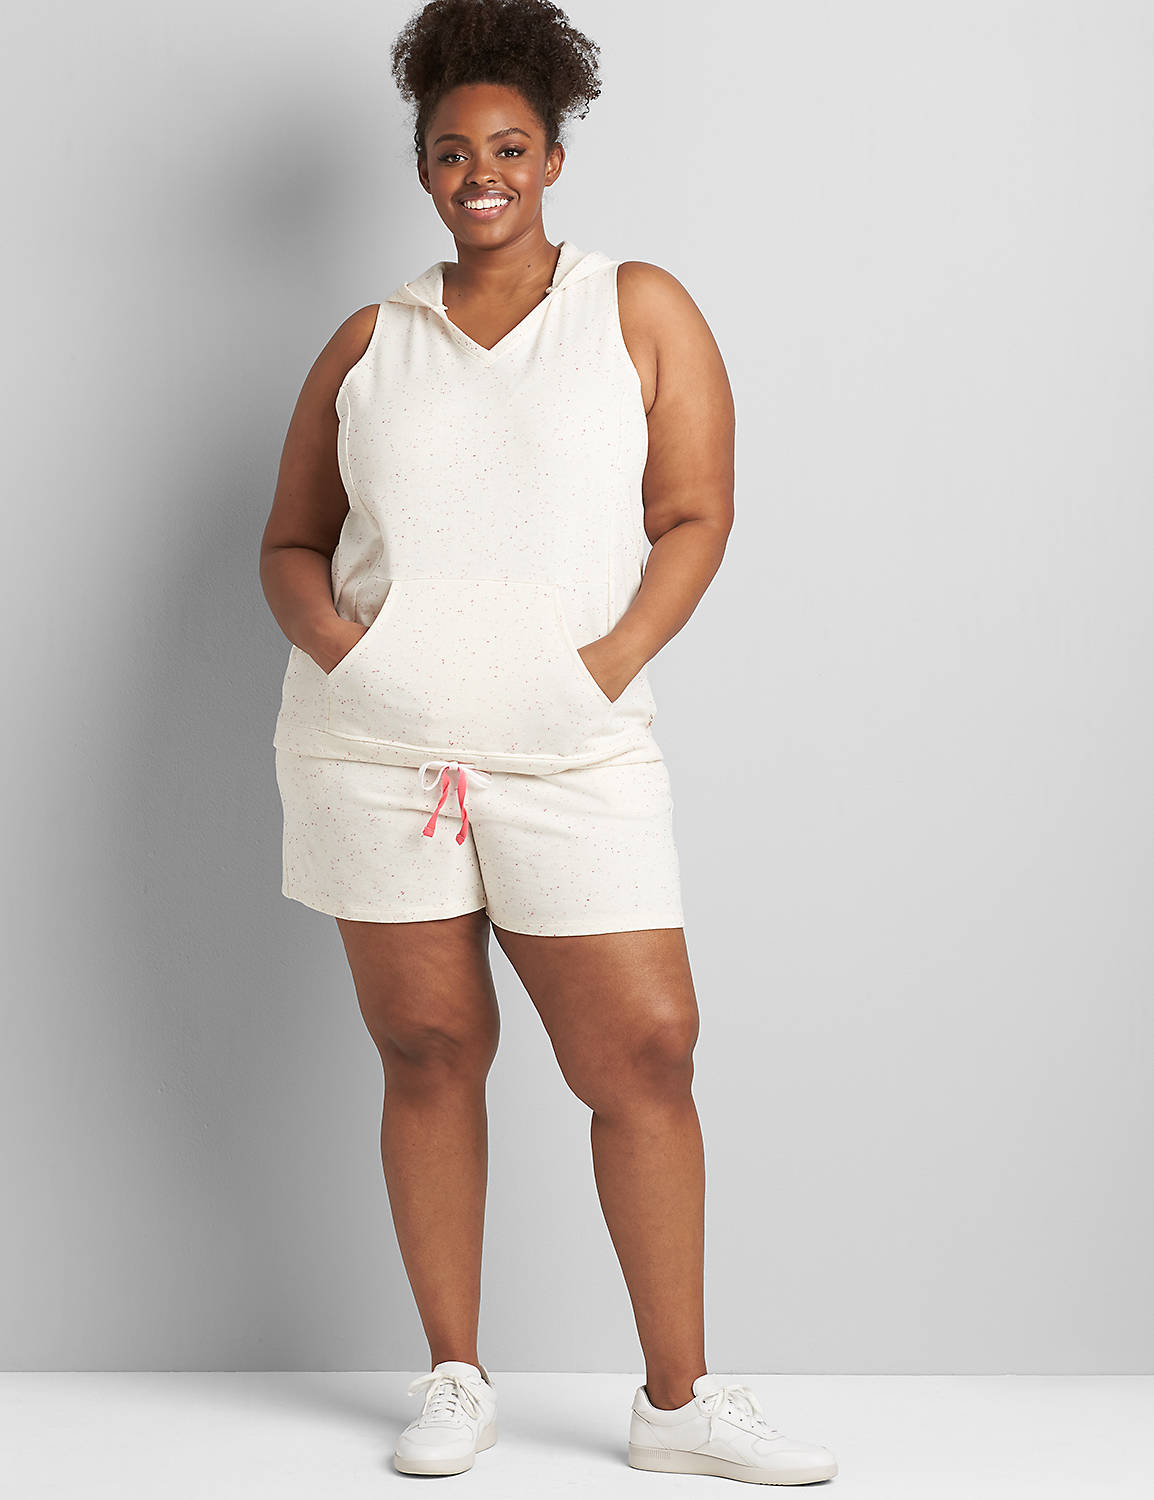 Pull On French Terry Short  S 1120474:Ascena White:38/40 Product Image 3